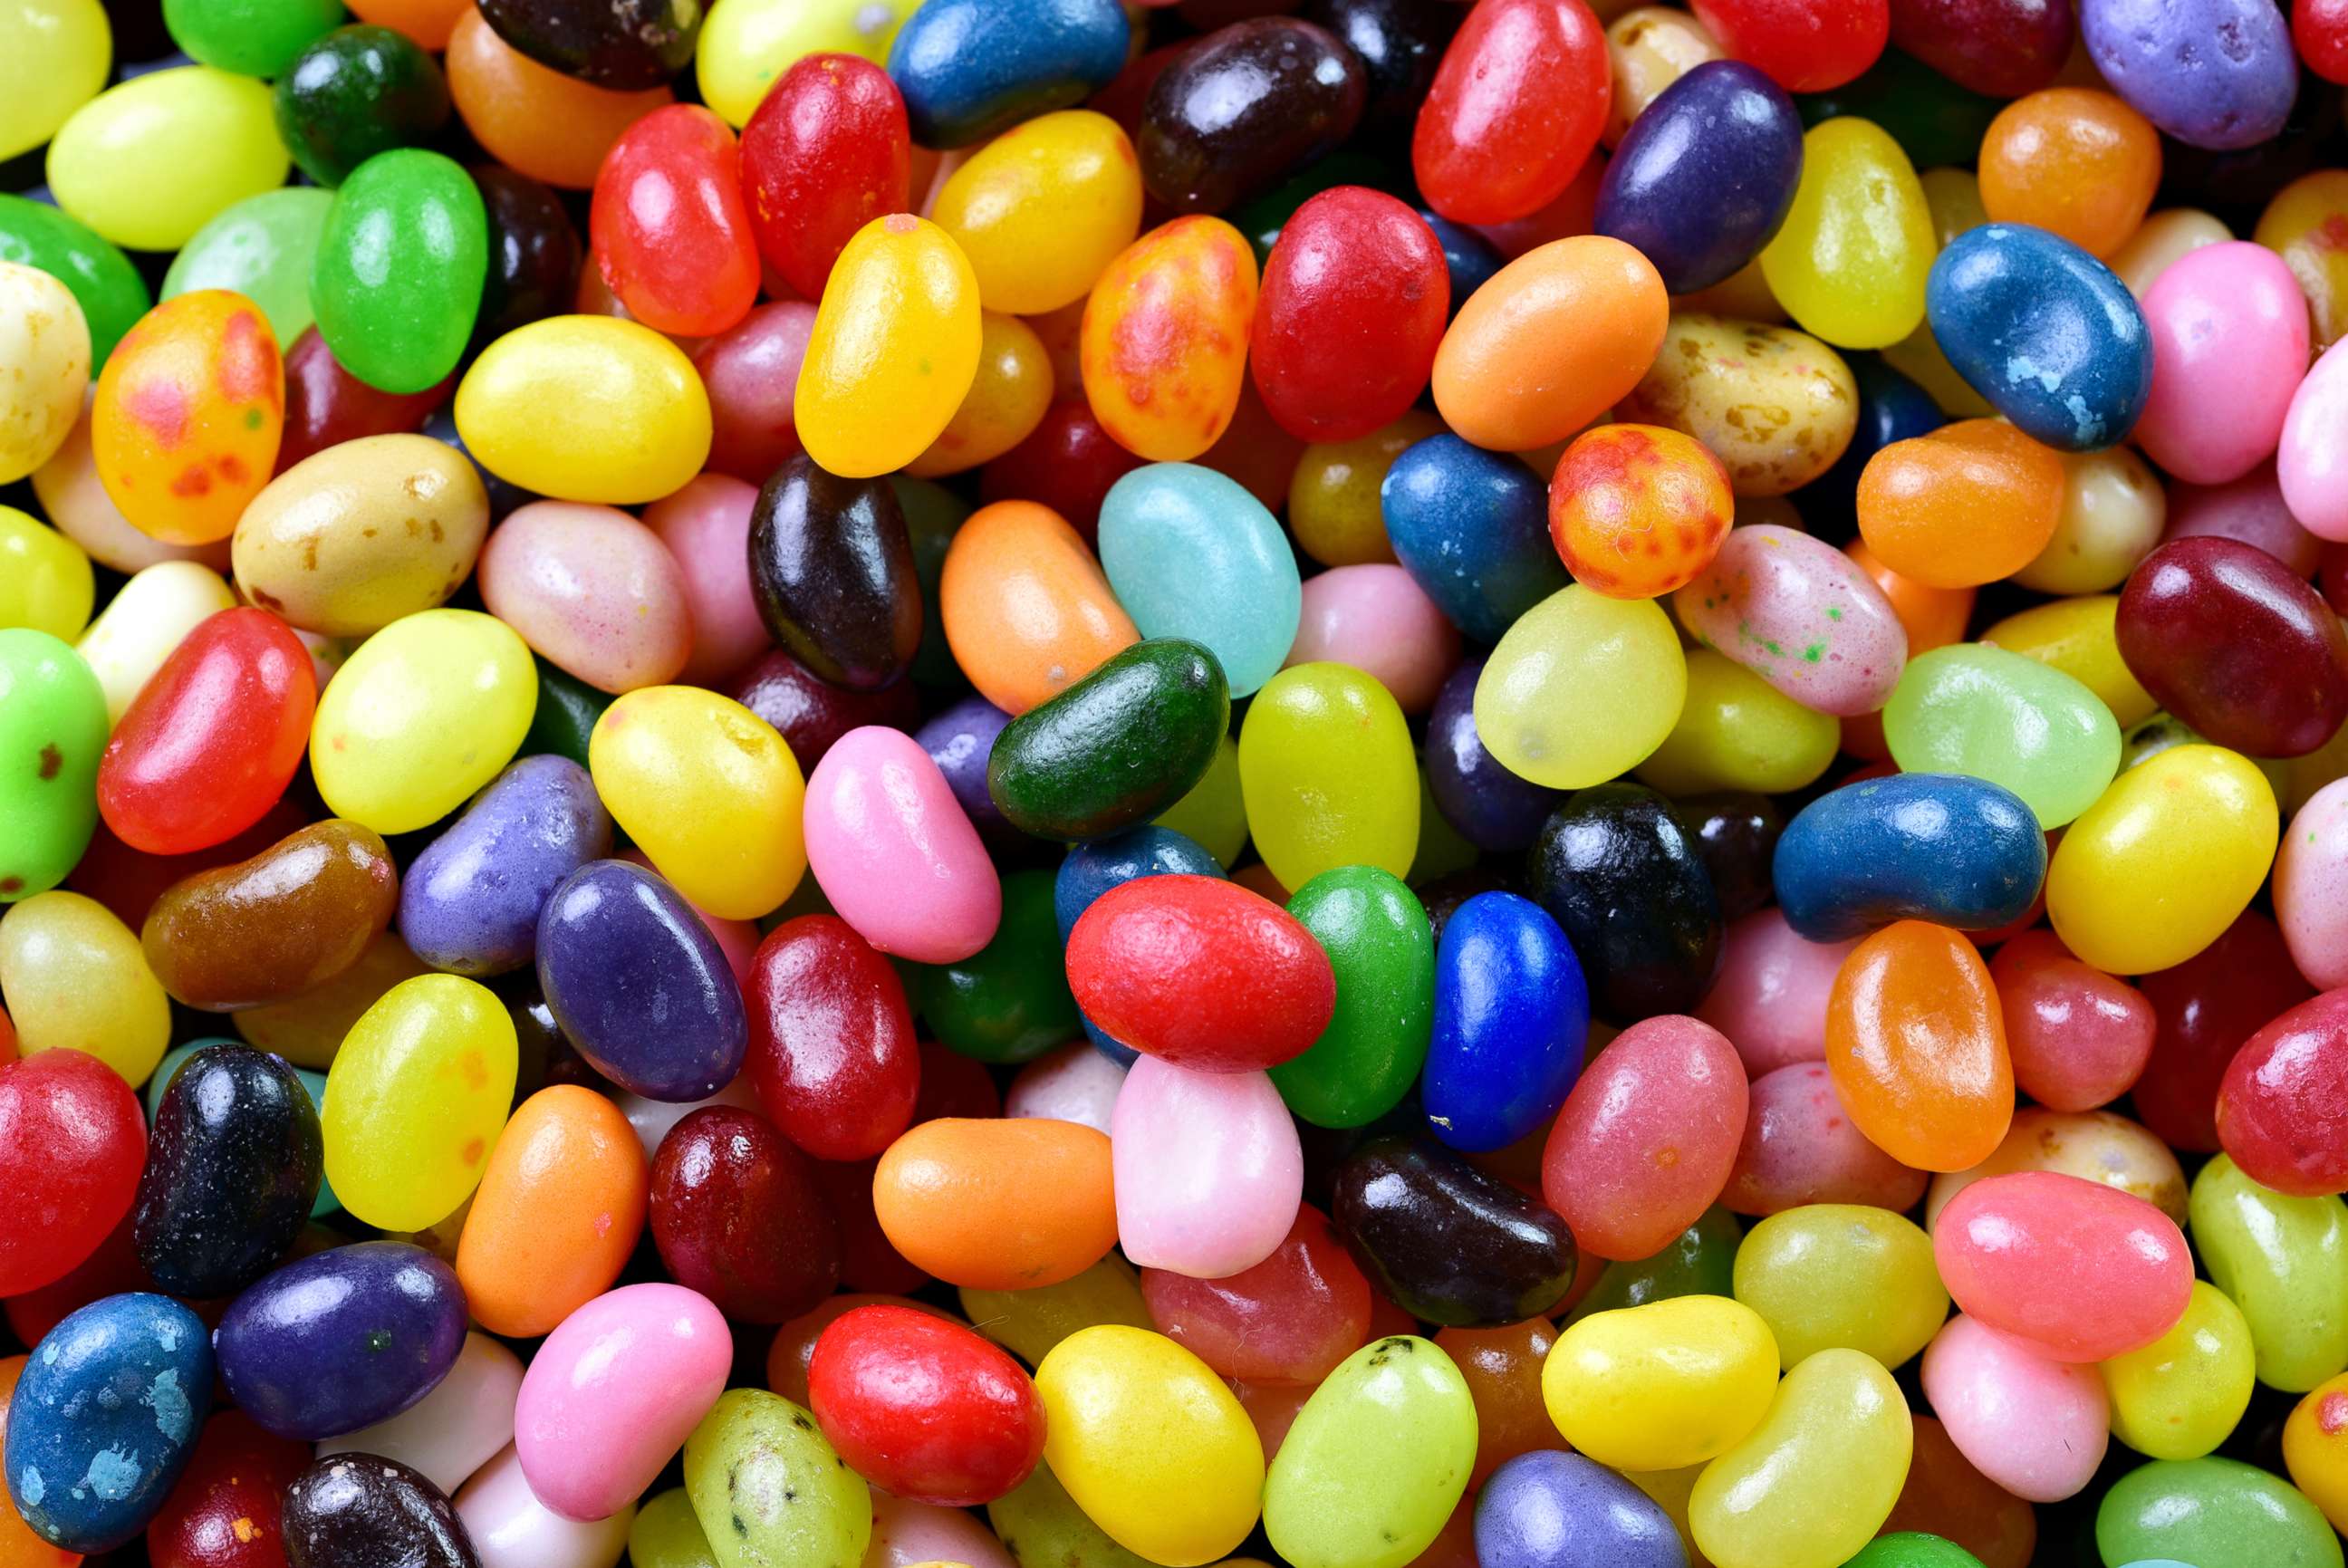 PHOTO: Jelly beans are pictured in this undated stock photo.